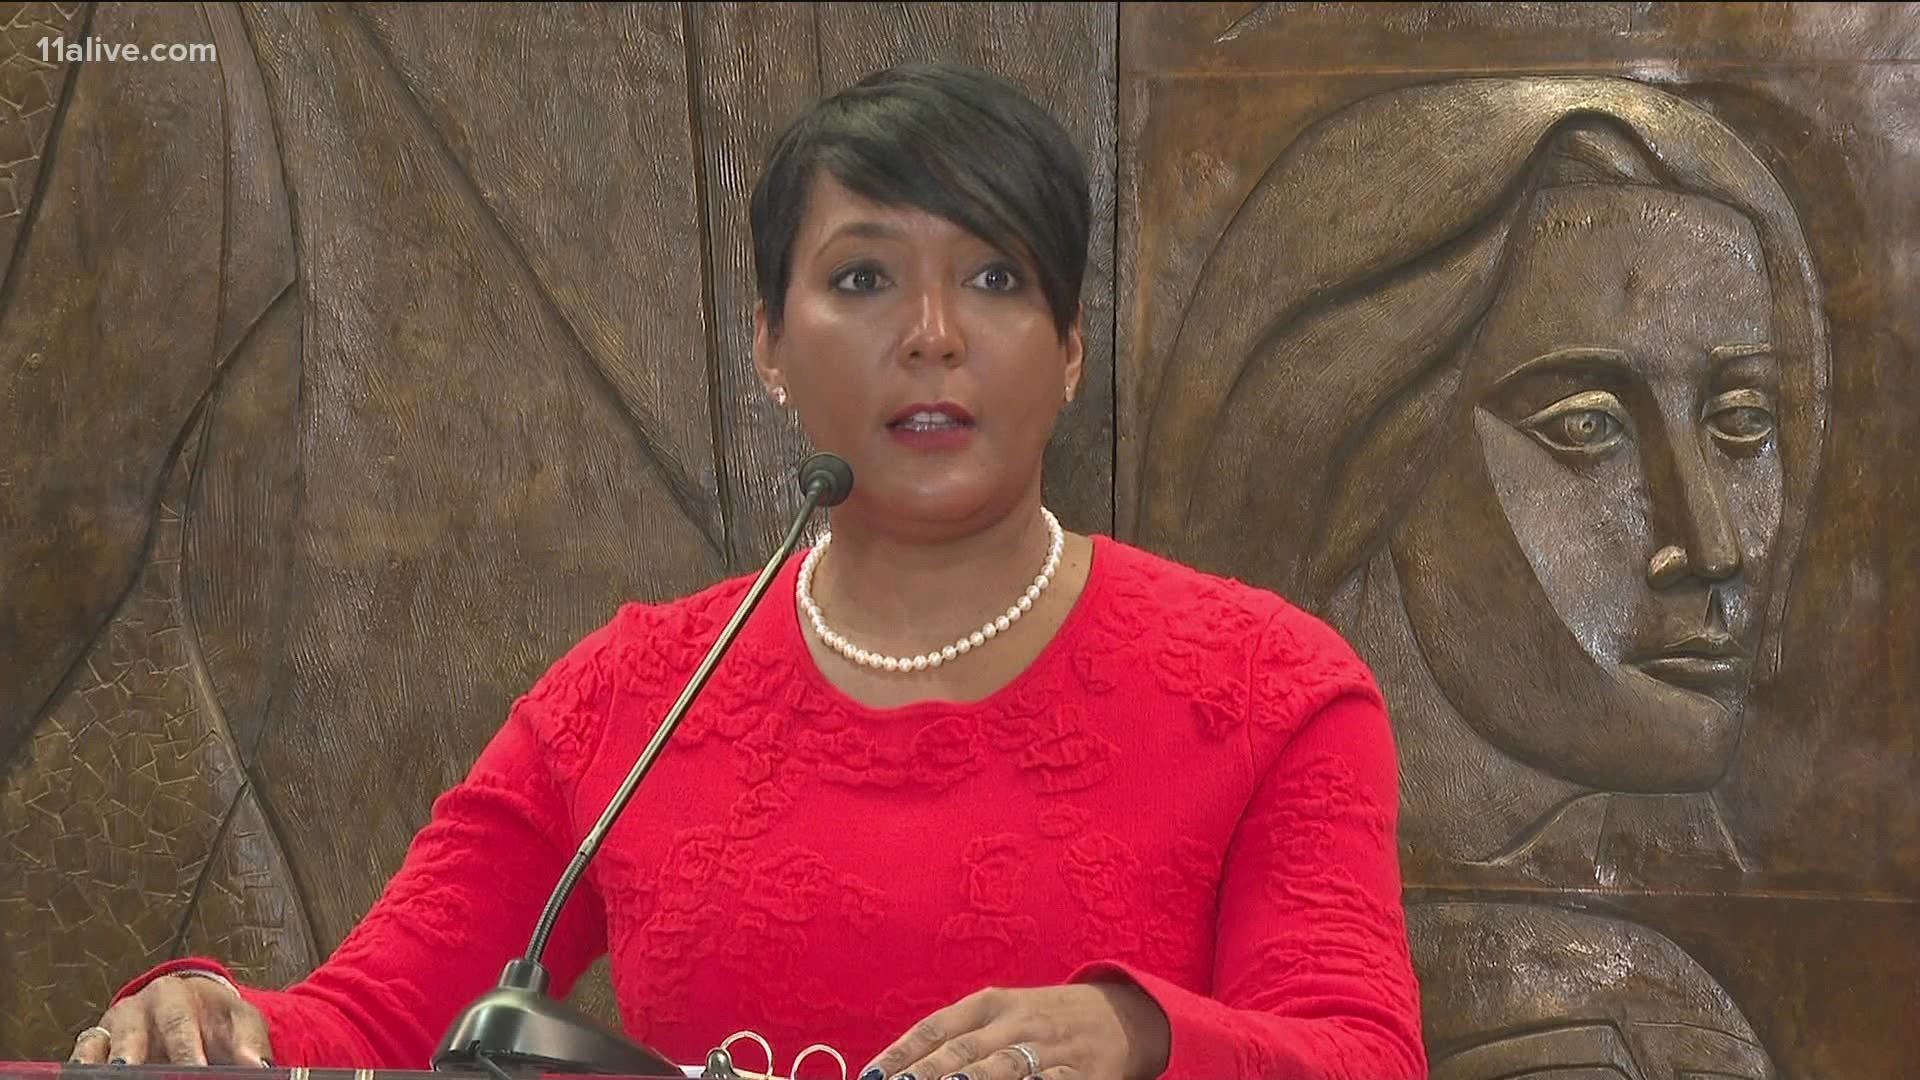 Atlanta's leader spoke with 11Alive to discuss her four years in office.